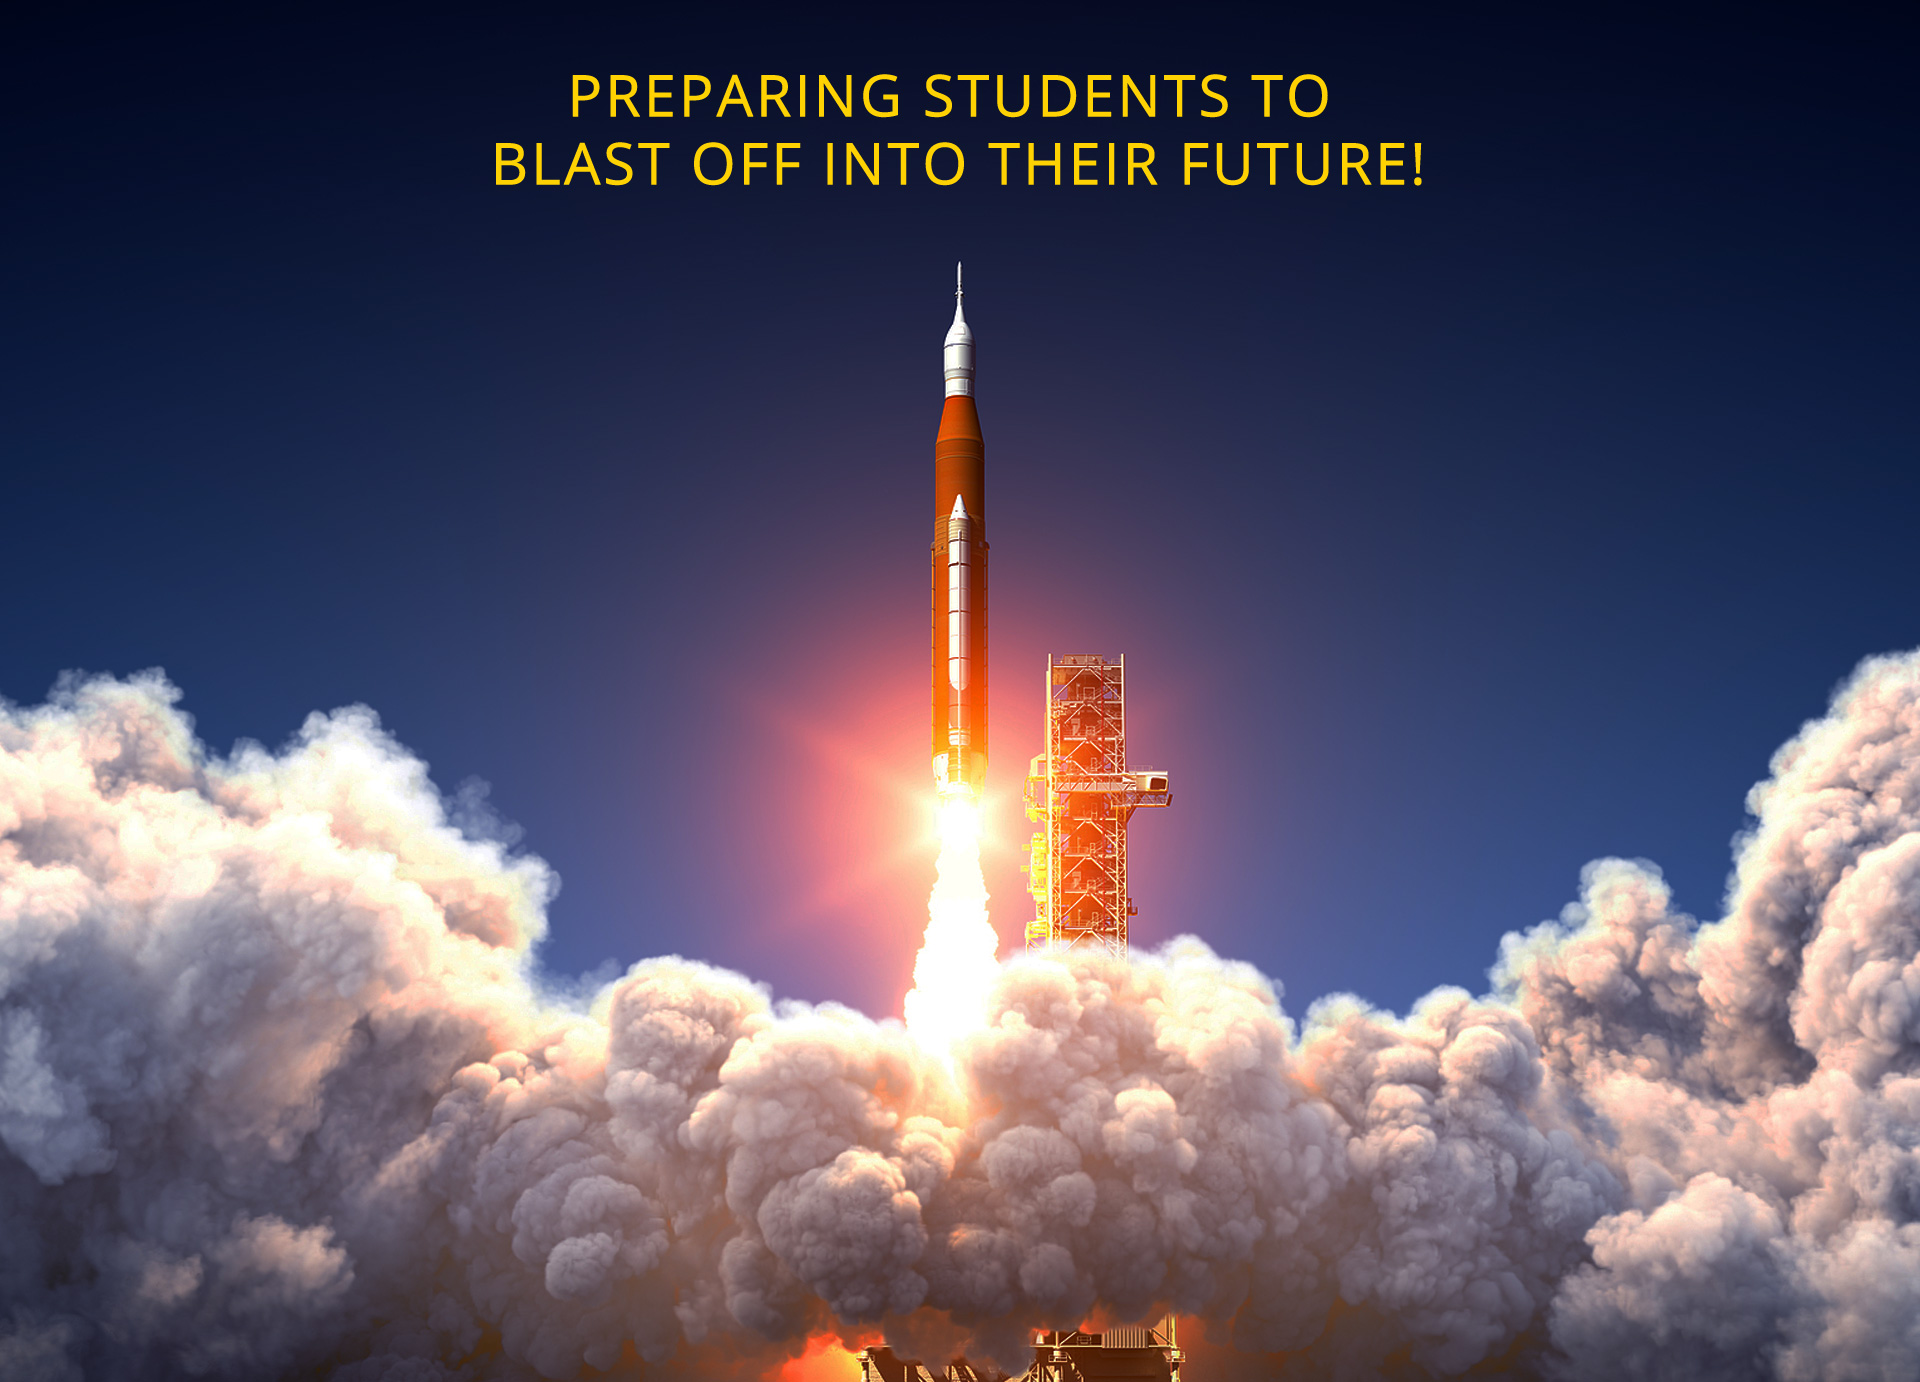 Rocket Launching - Preparing Students To Blast Off Into Your Future!